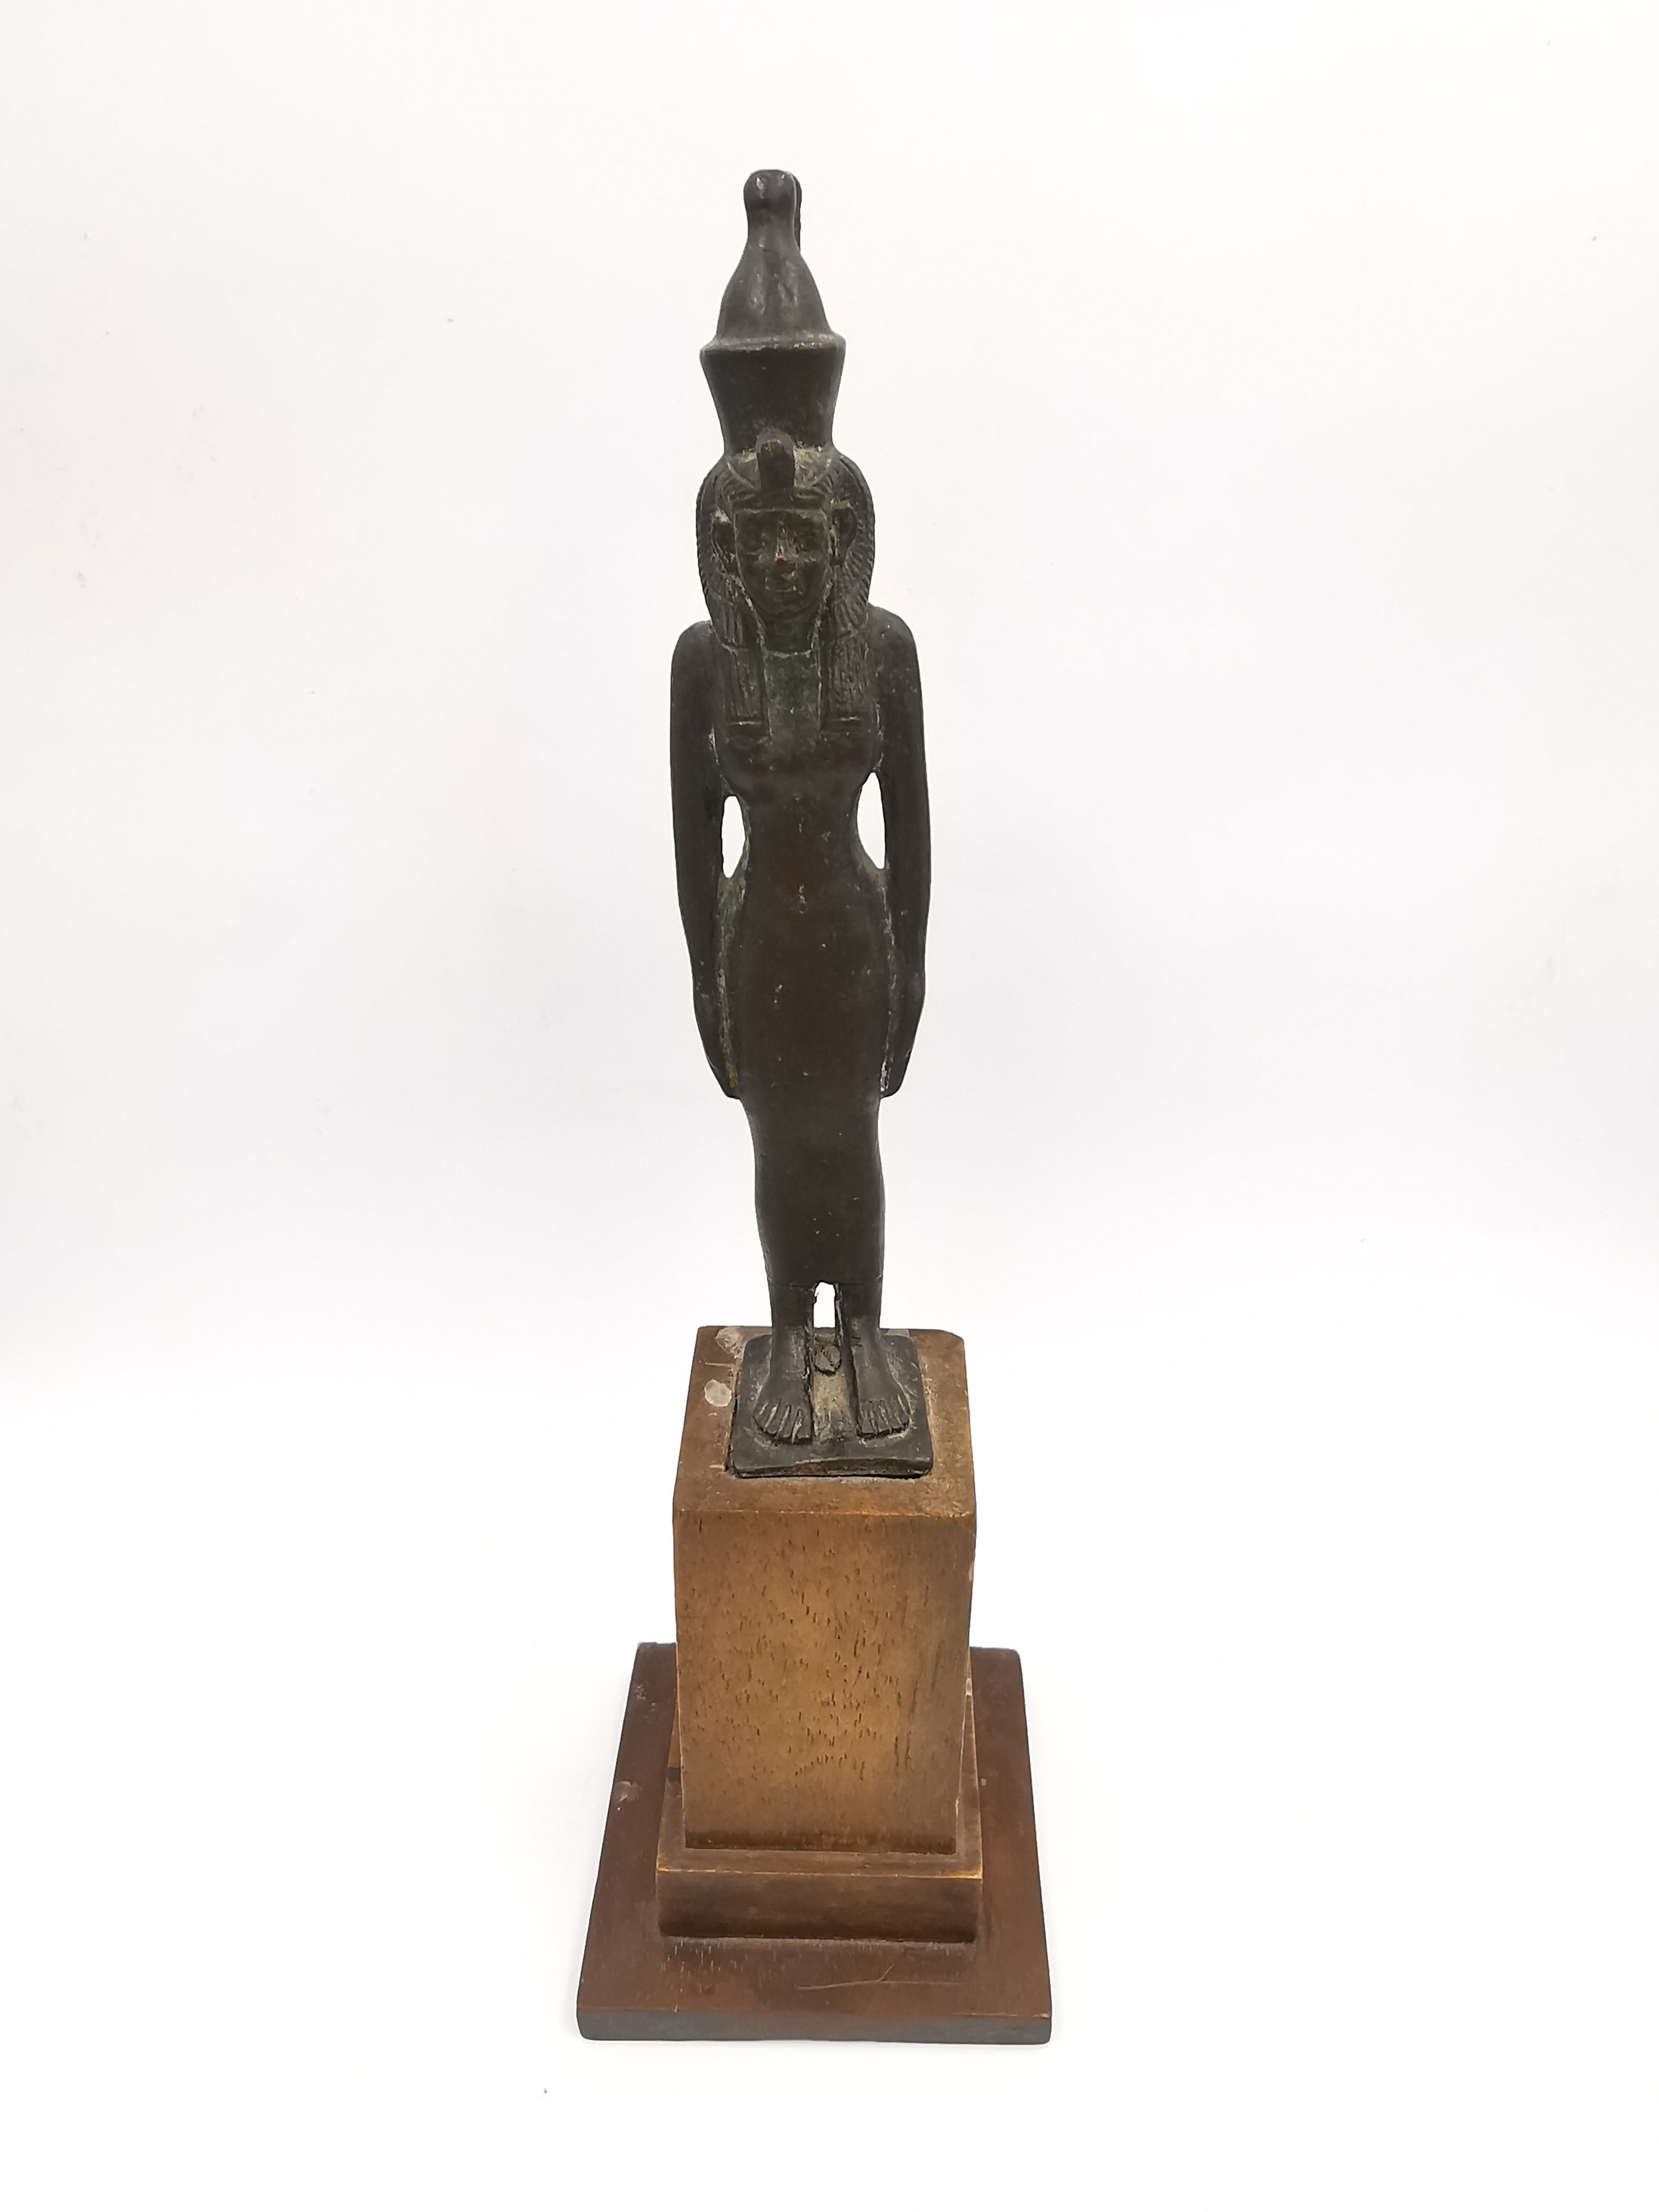 A 19th century Egyptian style bronze statue of an Egyptian god mounted on a wooden stand. H.20cm.